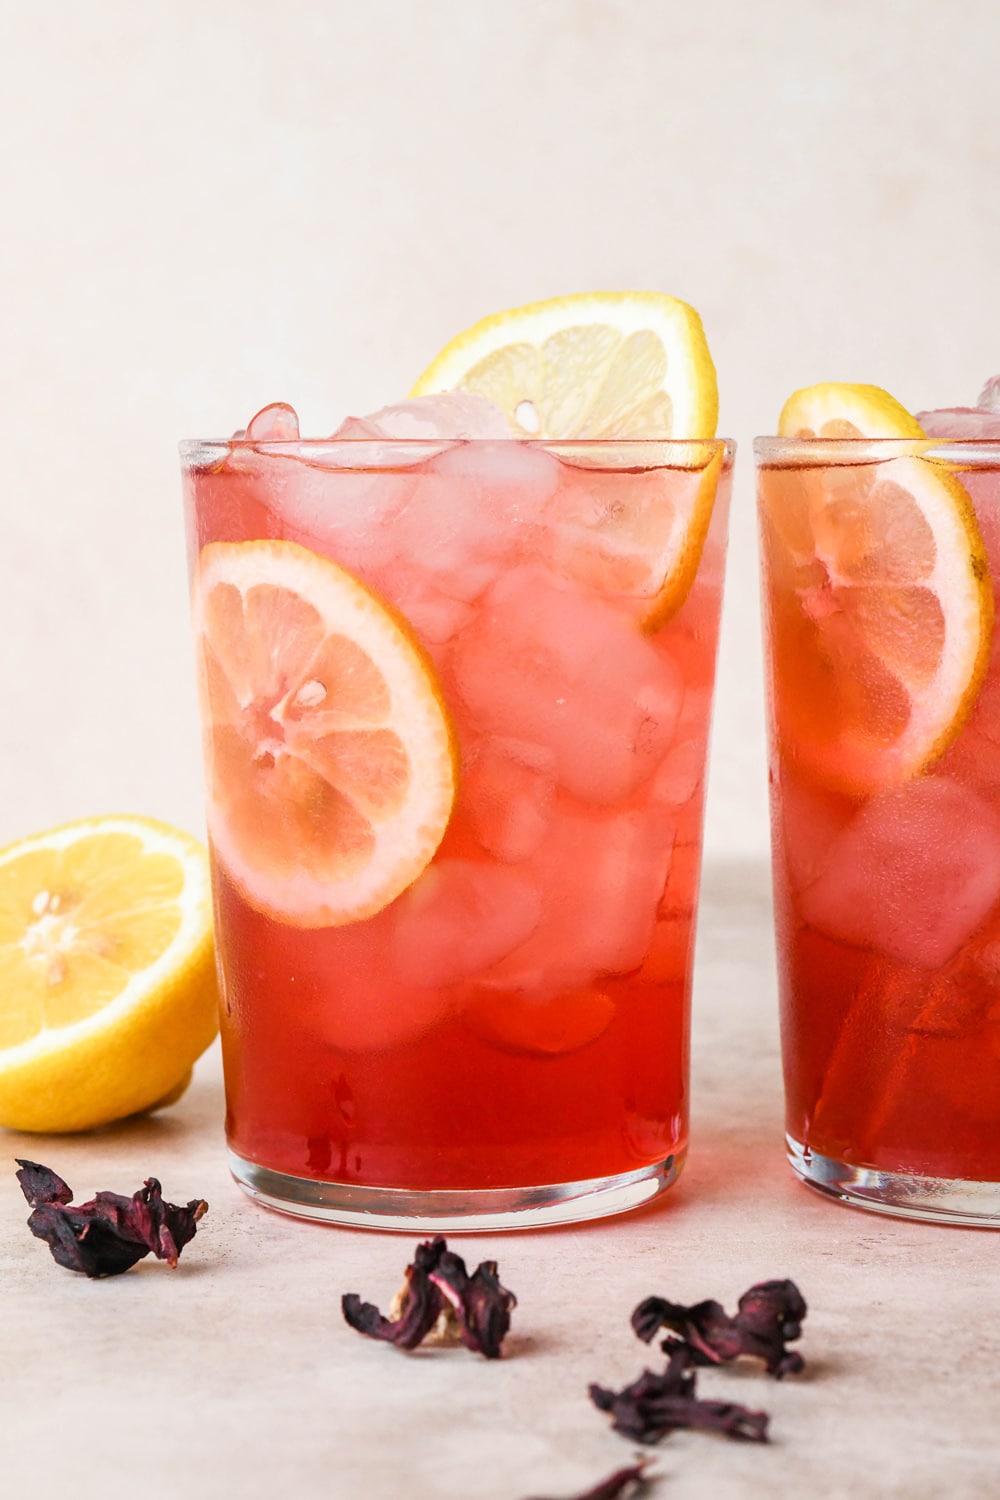 Two clear glasses of bright pink hibiscus lemonade sitting side by side against a creamy background, garnished with lemon wheels and dried hibiscus flowers, surrounded by some scattered dried hibiscus and cut lemons.